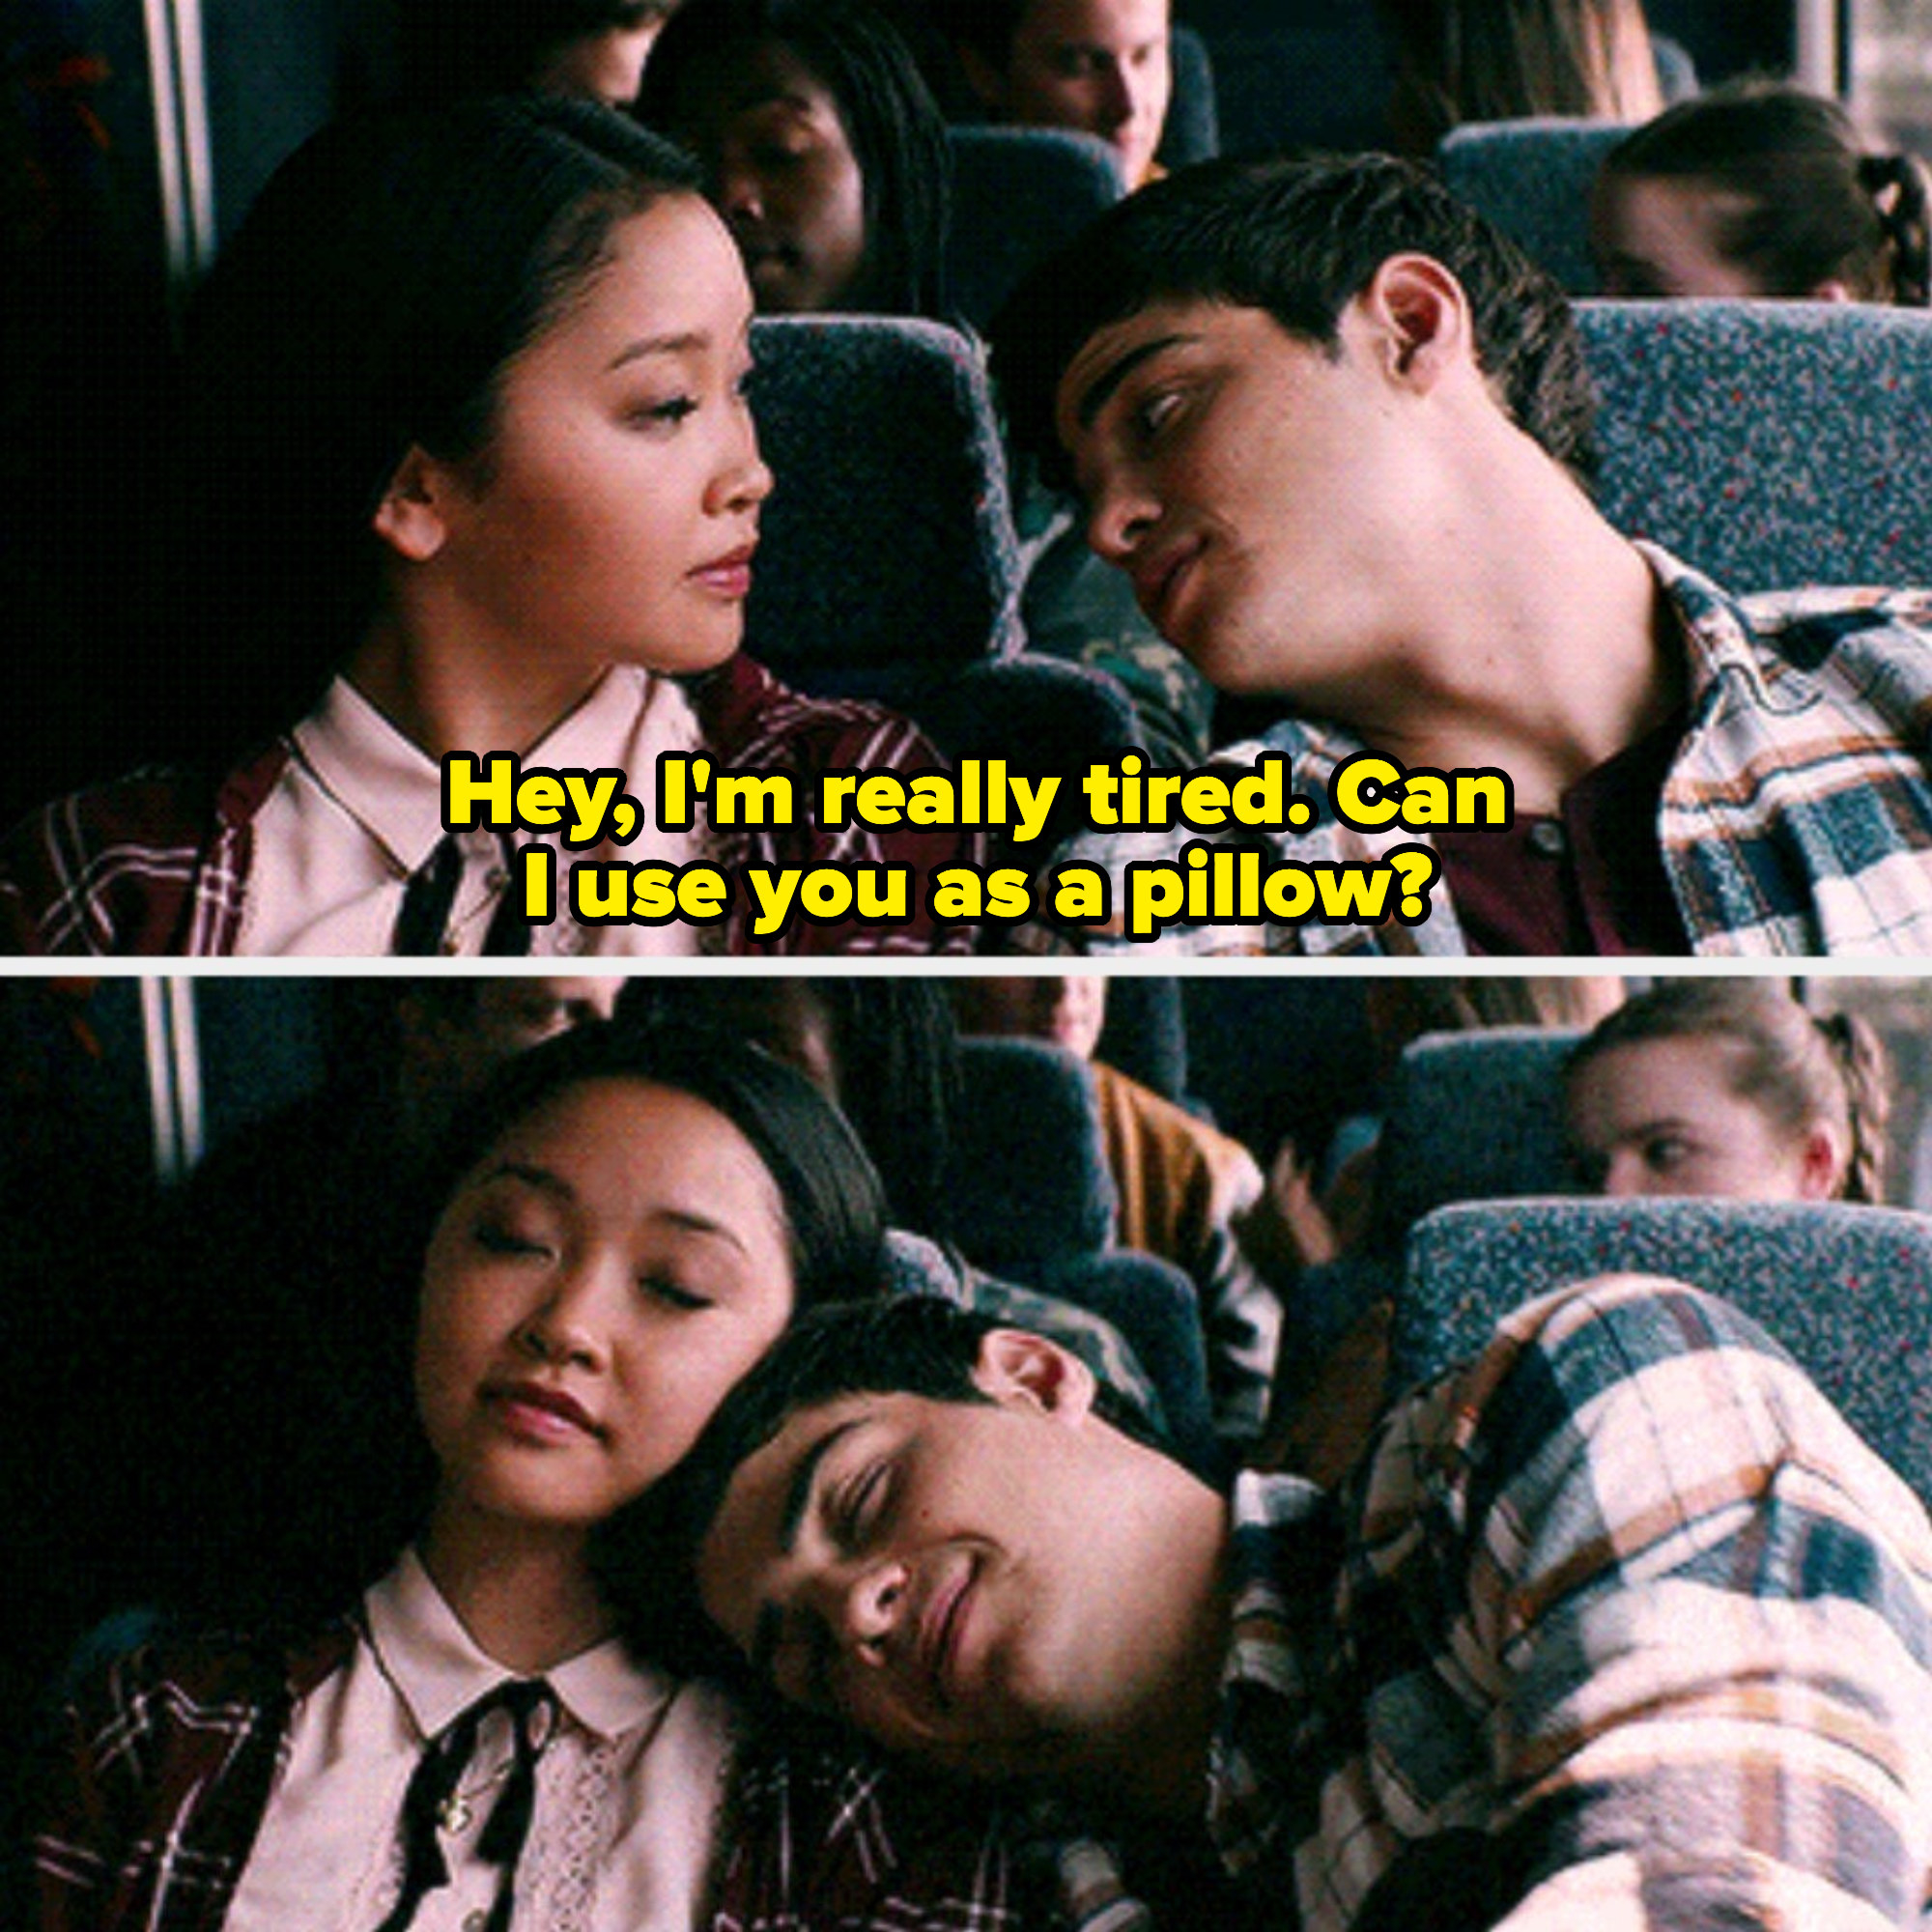 Peter asking Lara Jean: &quot;Hey, I&#x27;m really tired. Can I use you as a pillow?&quot;